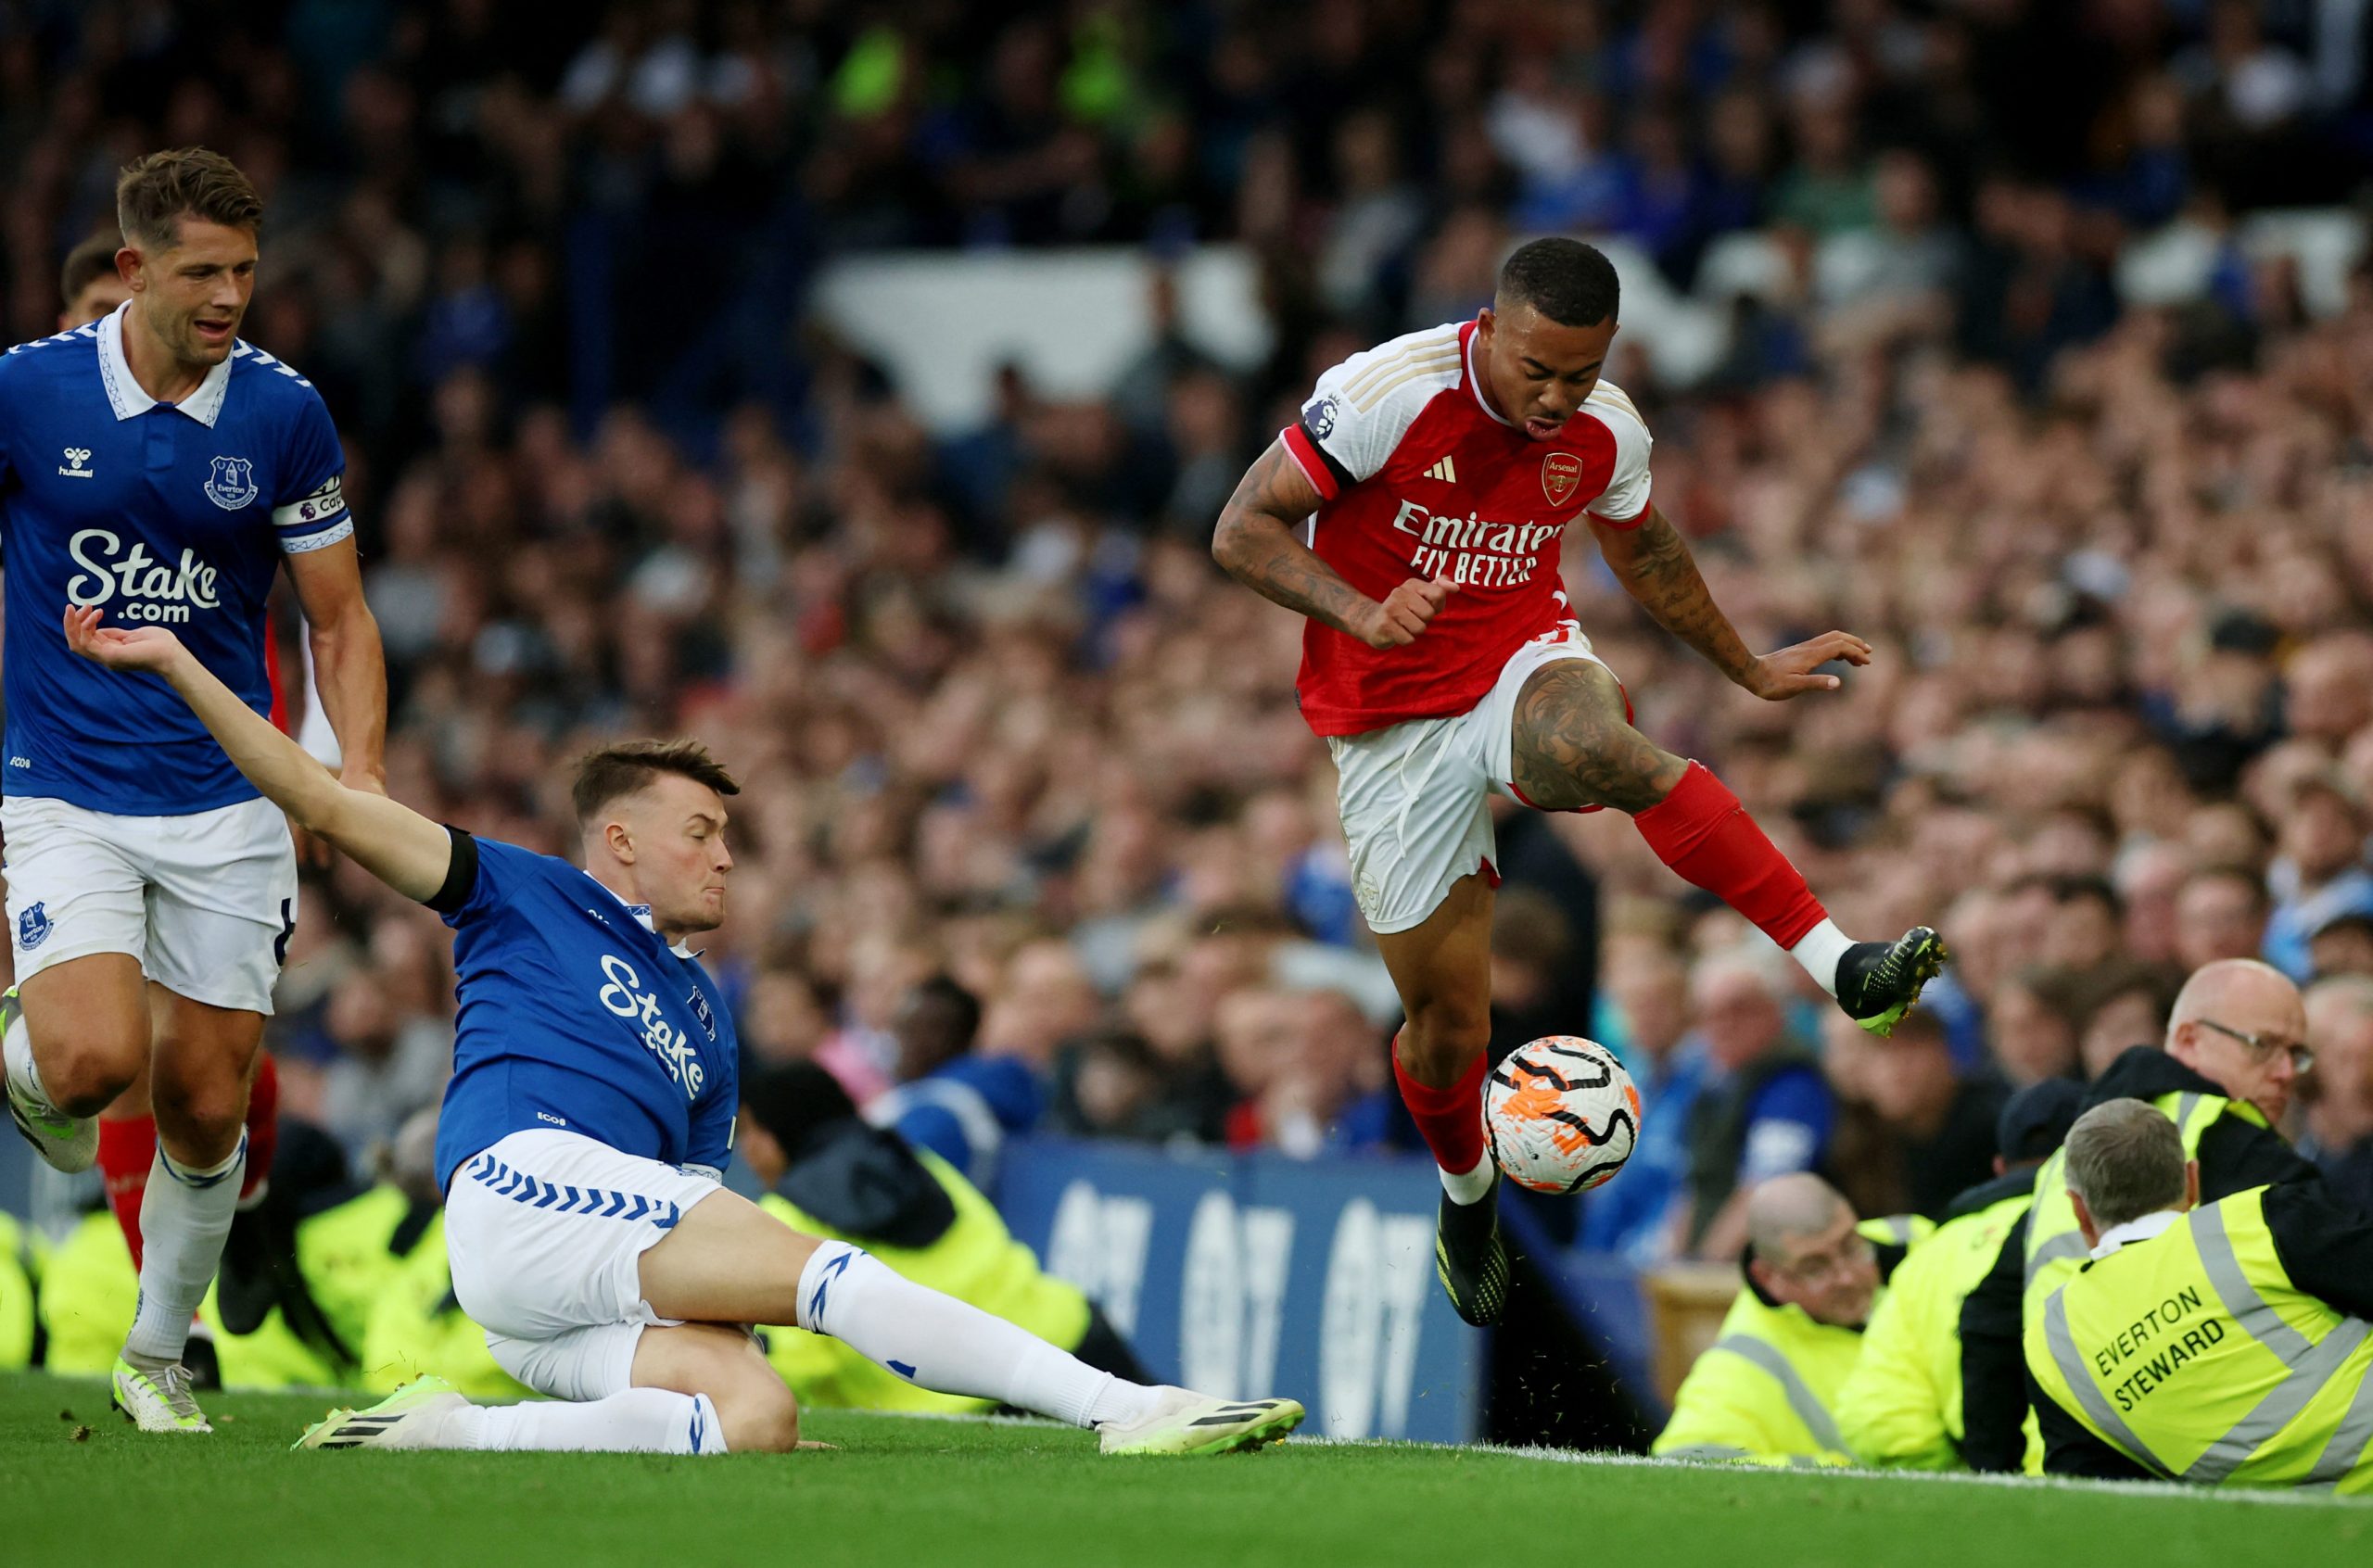 Trossard's Goal Helps Arsenal Beat Everton, 'We Played the Game Where We Wanted to' Mikel Arteta